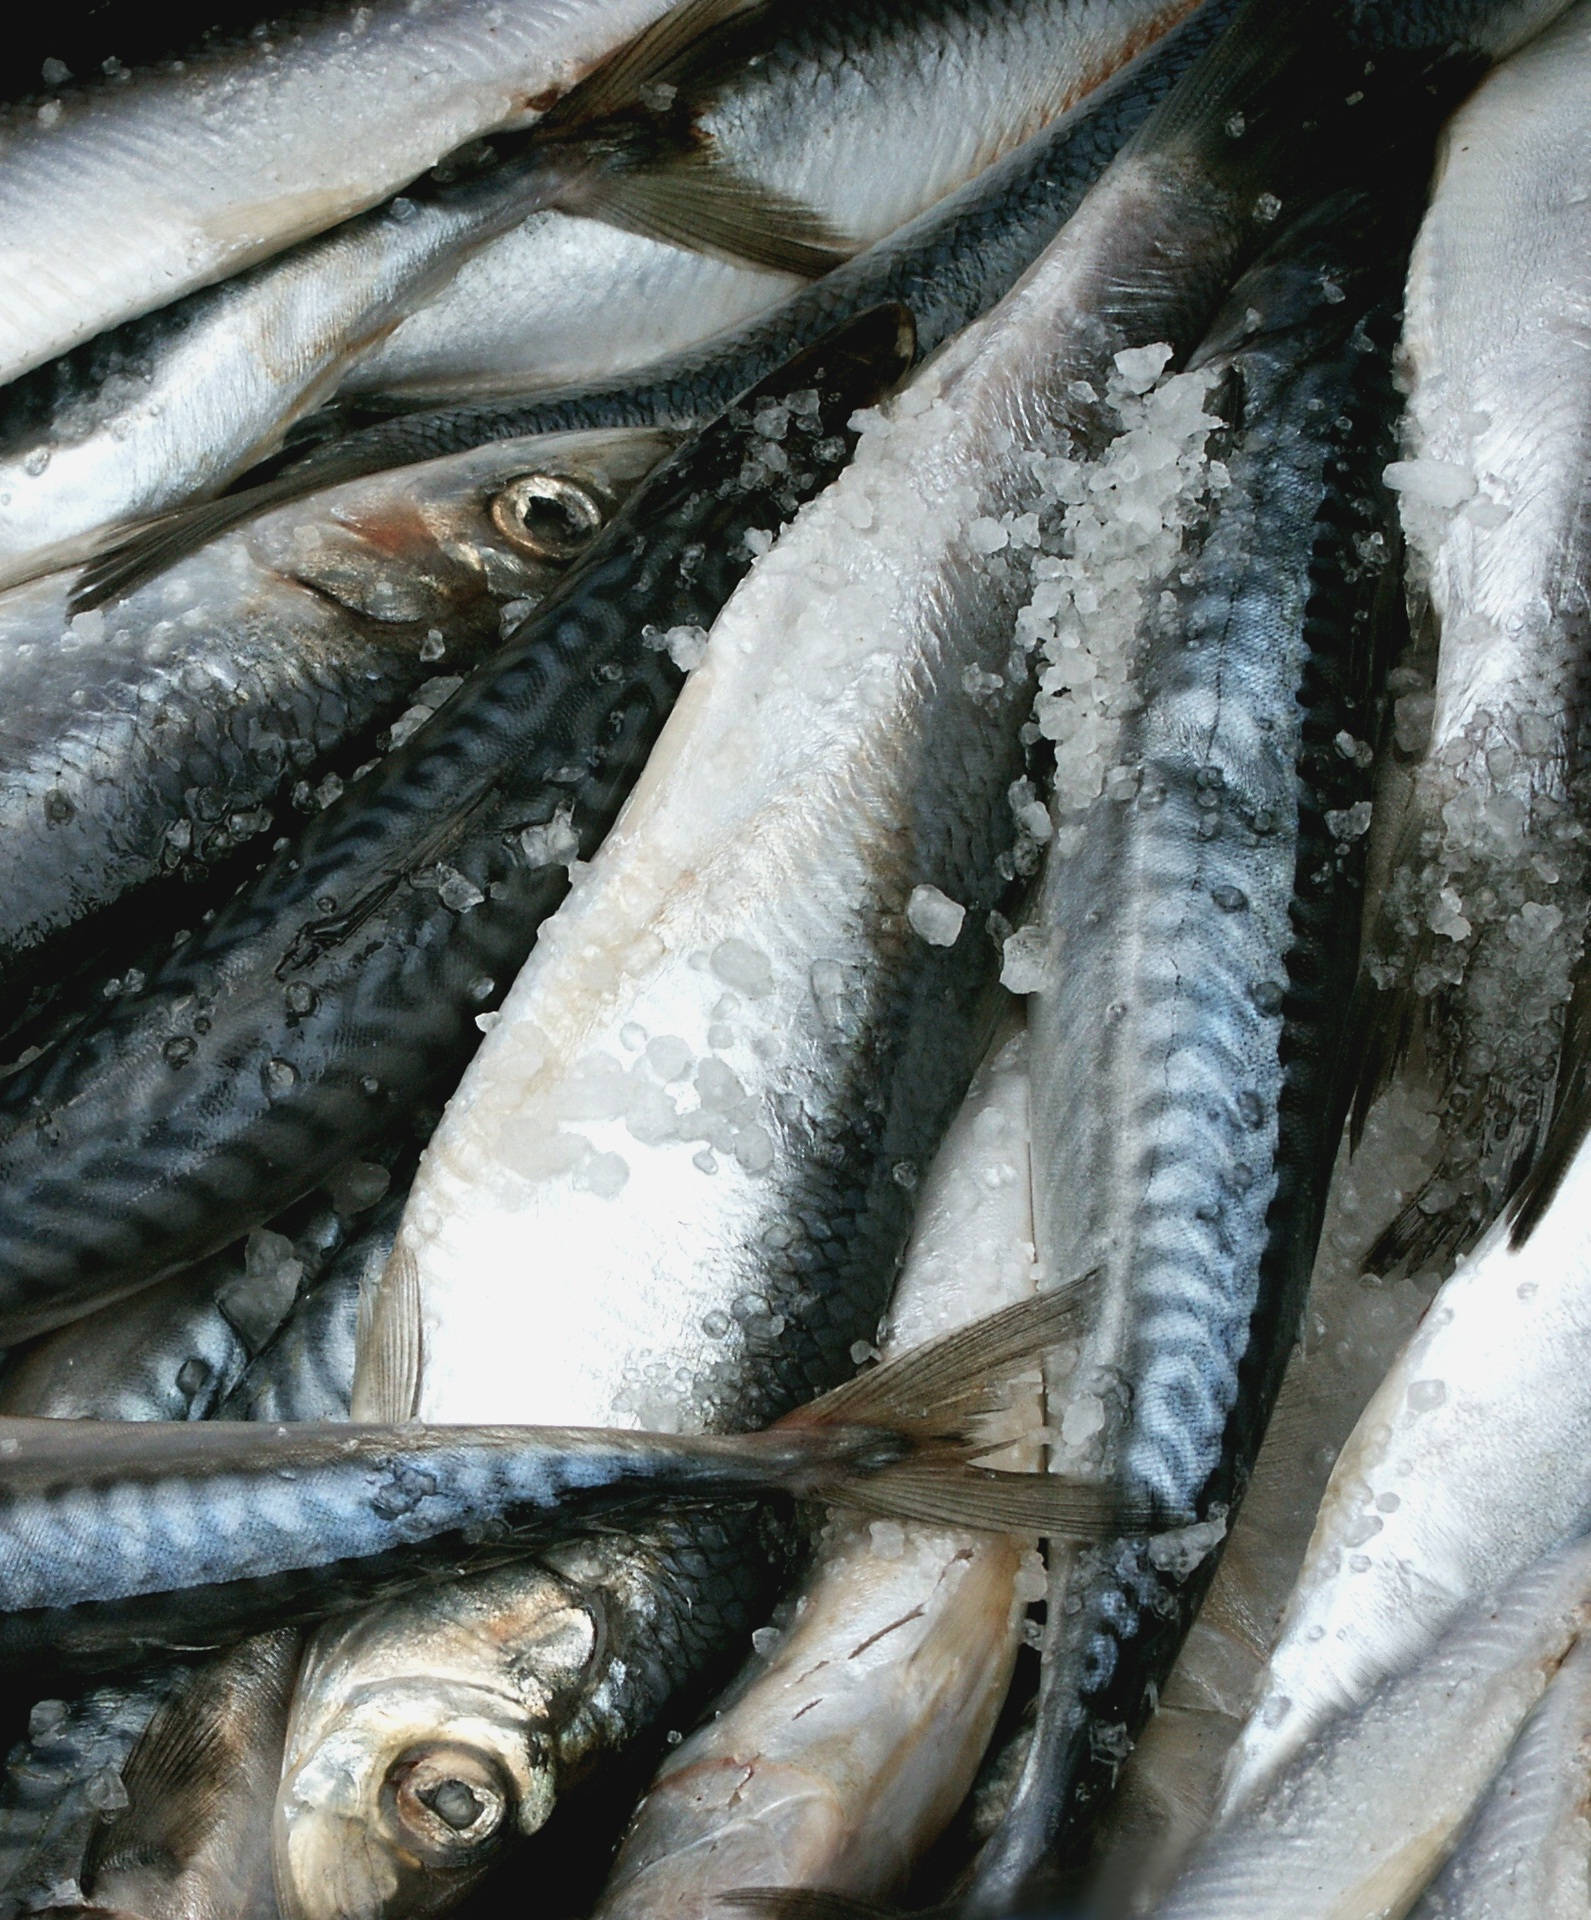 Freshsalted Herrings In Italian Could Be Translated As 